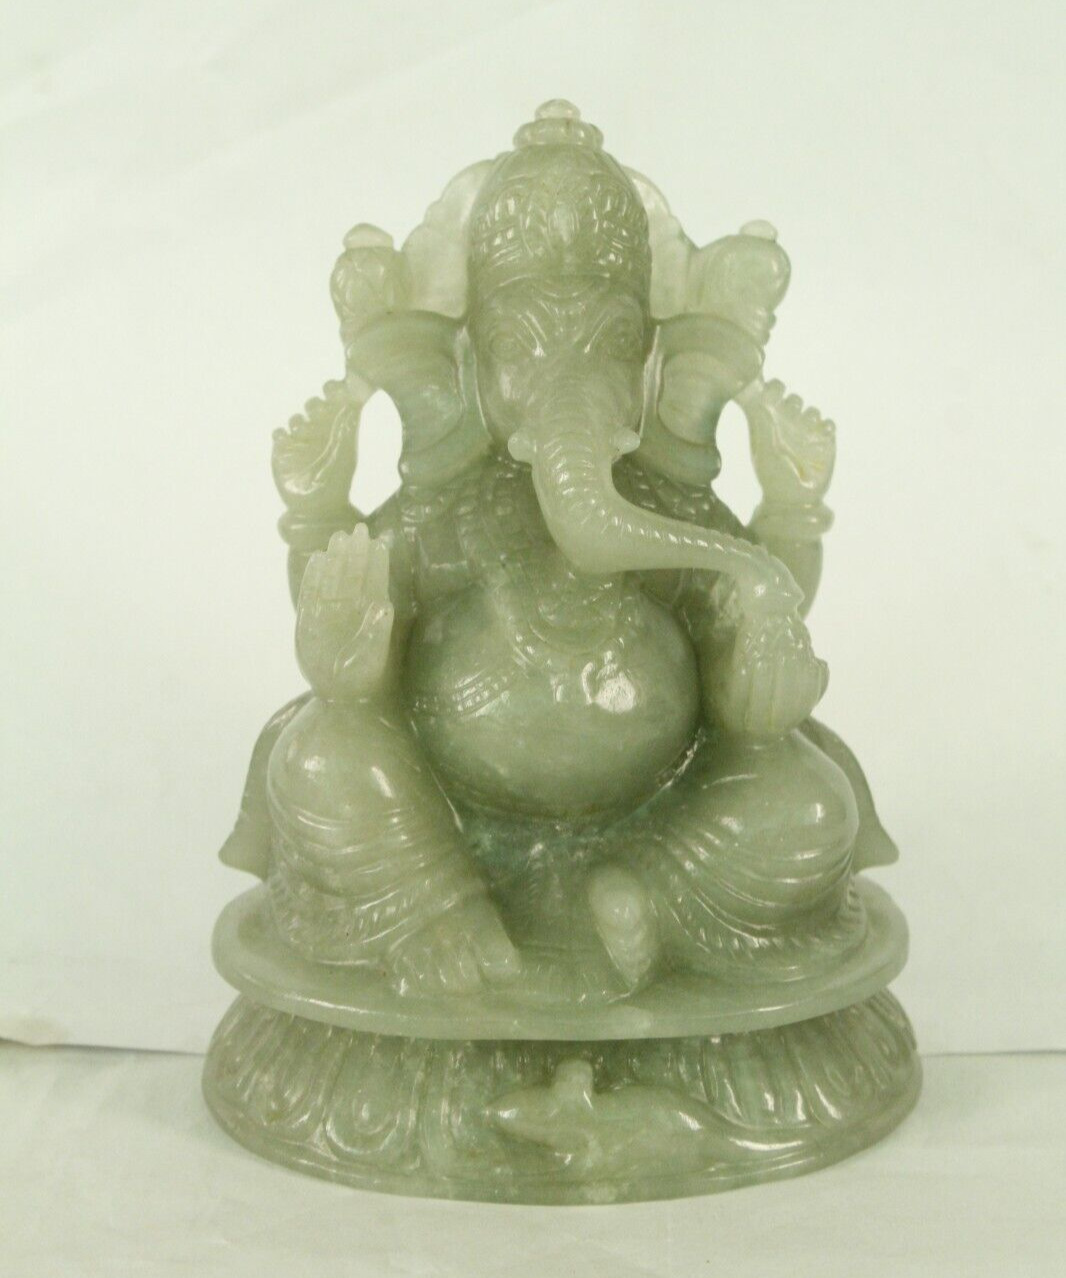 5.5 Inches Ganesha Statue Hand Carved Aventurine Stone Religious Idol For Table